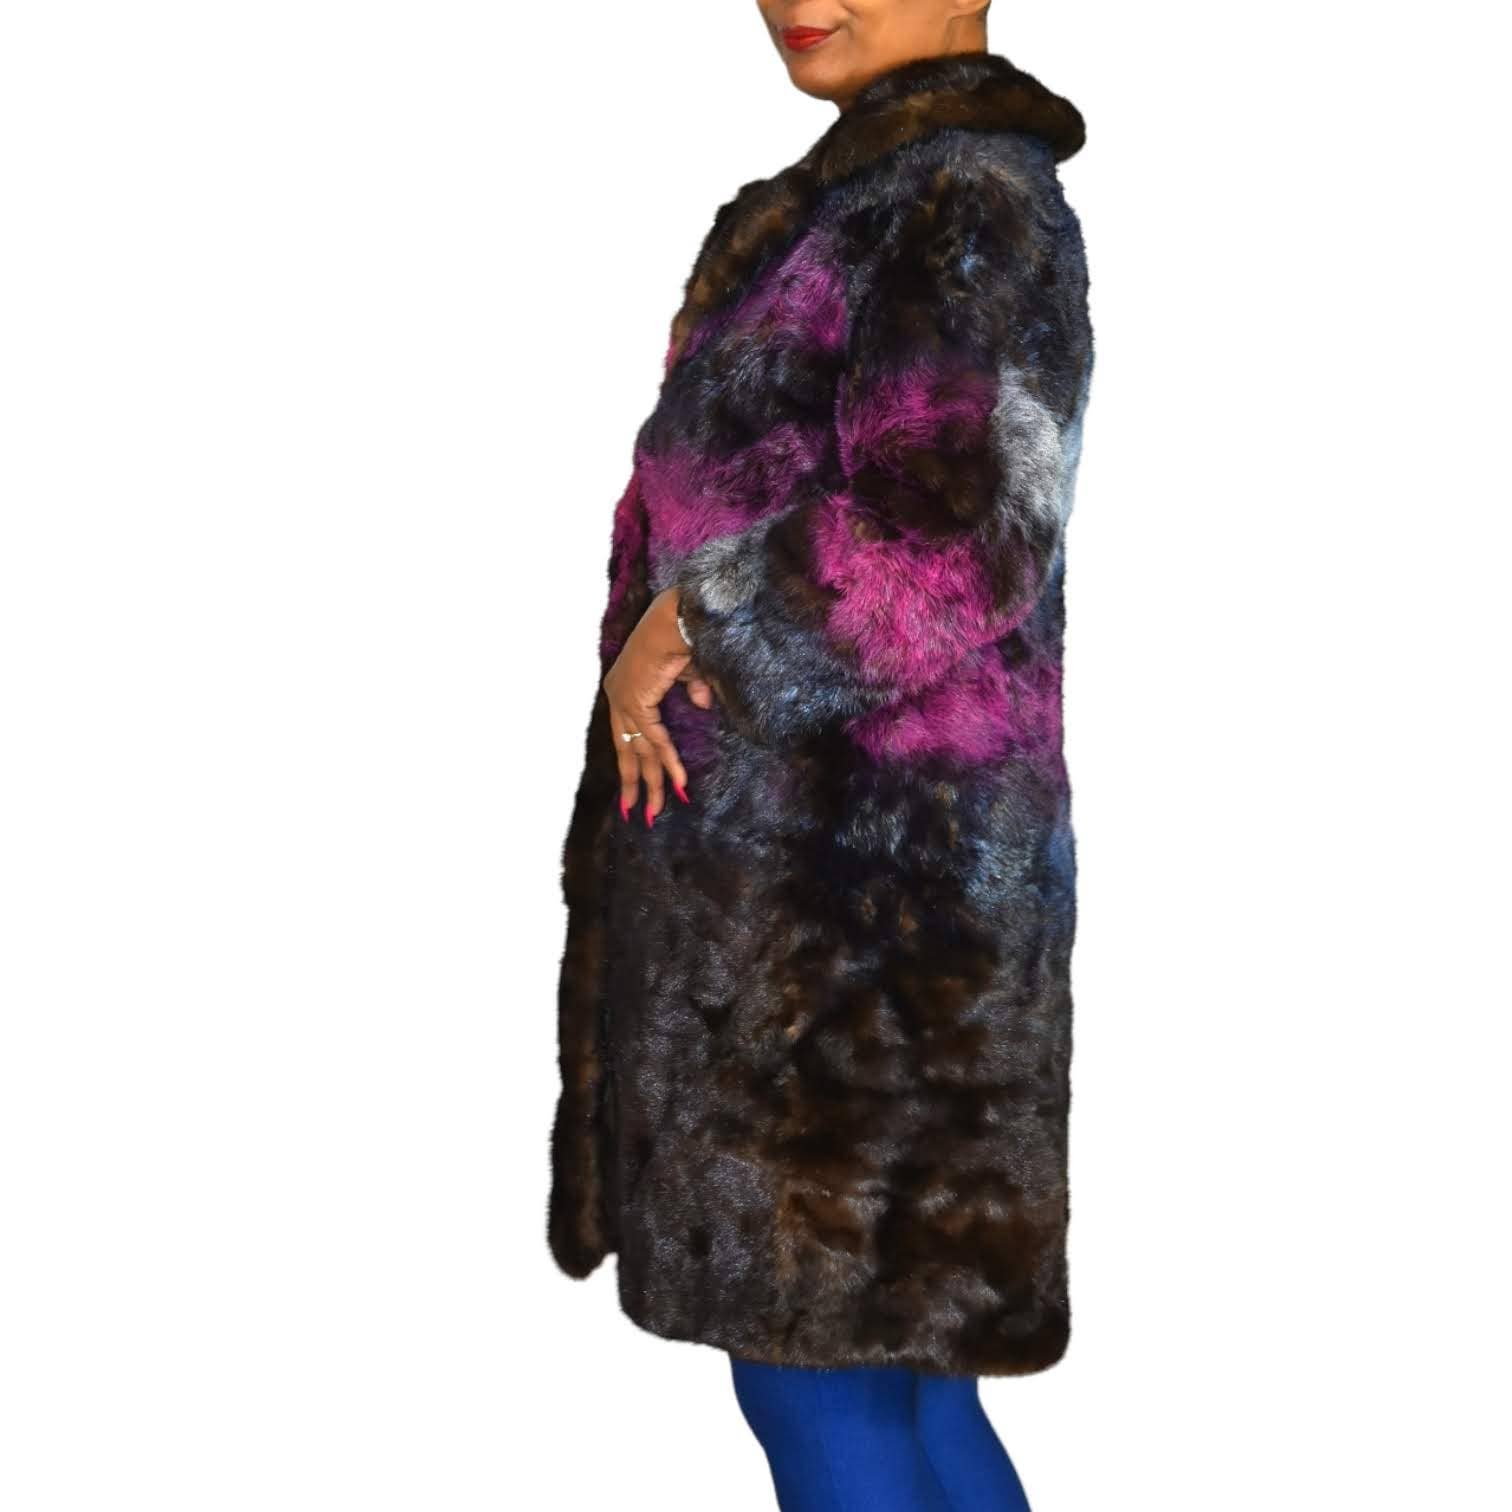 Vintage Fur Coat Painted Brown DIY ReFashion ReWorked Pink Recycled 60s Size XS